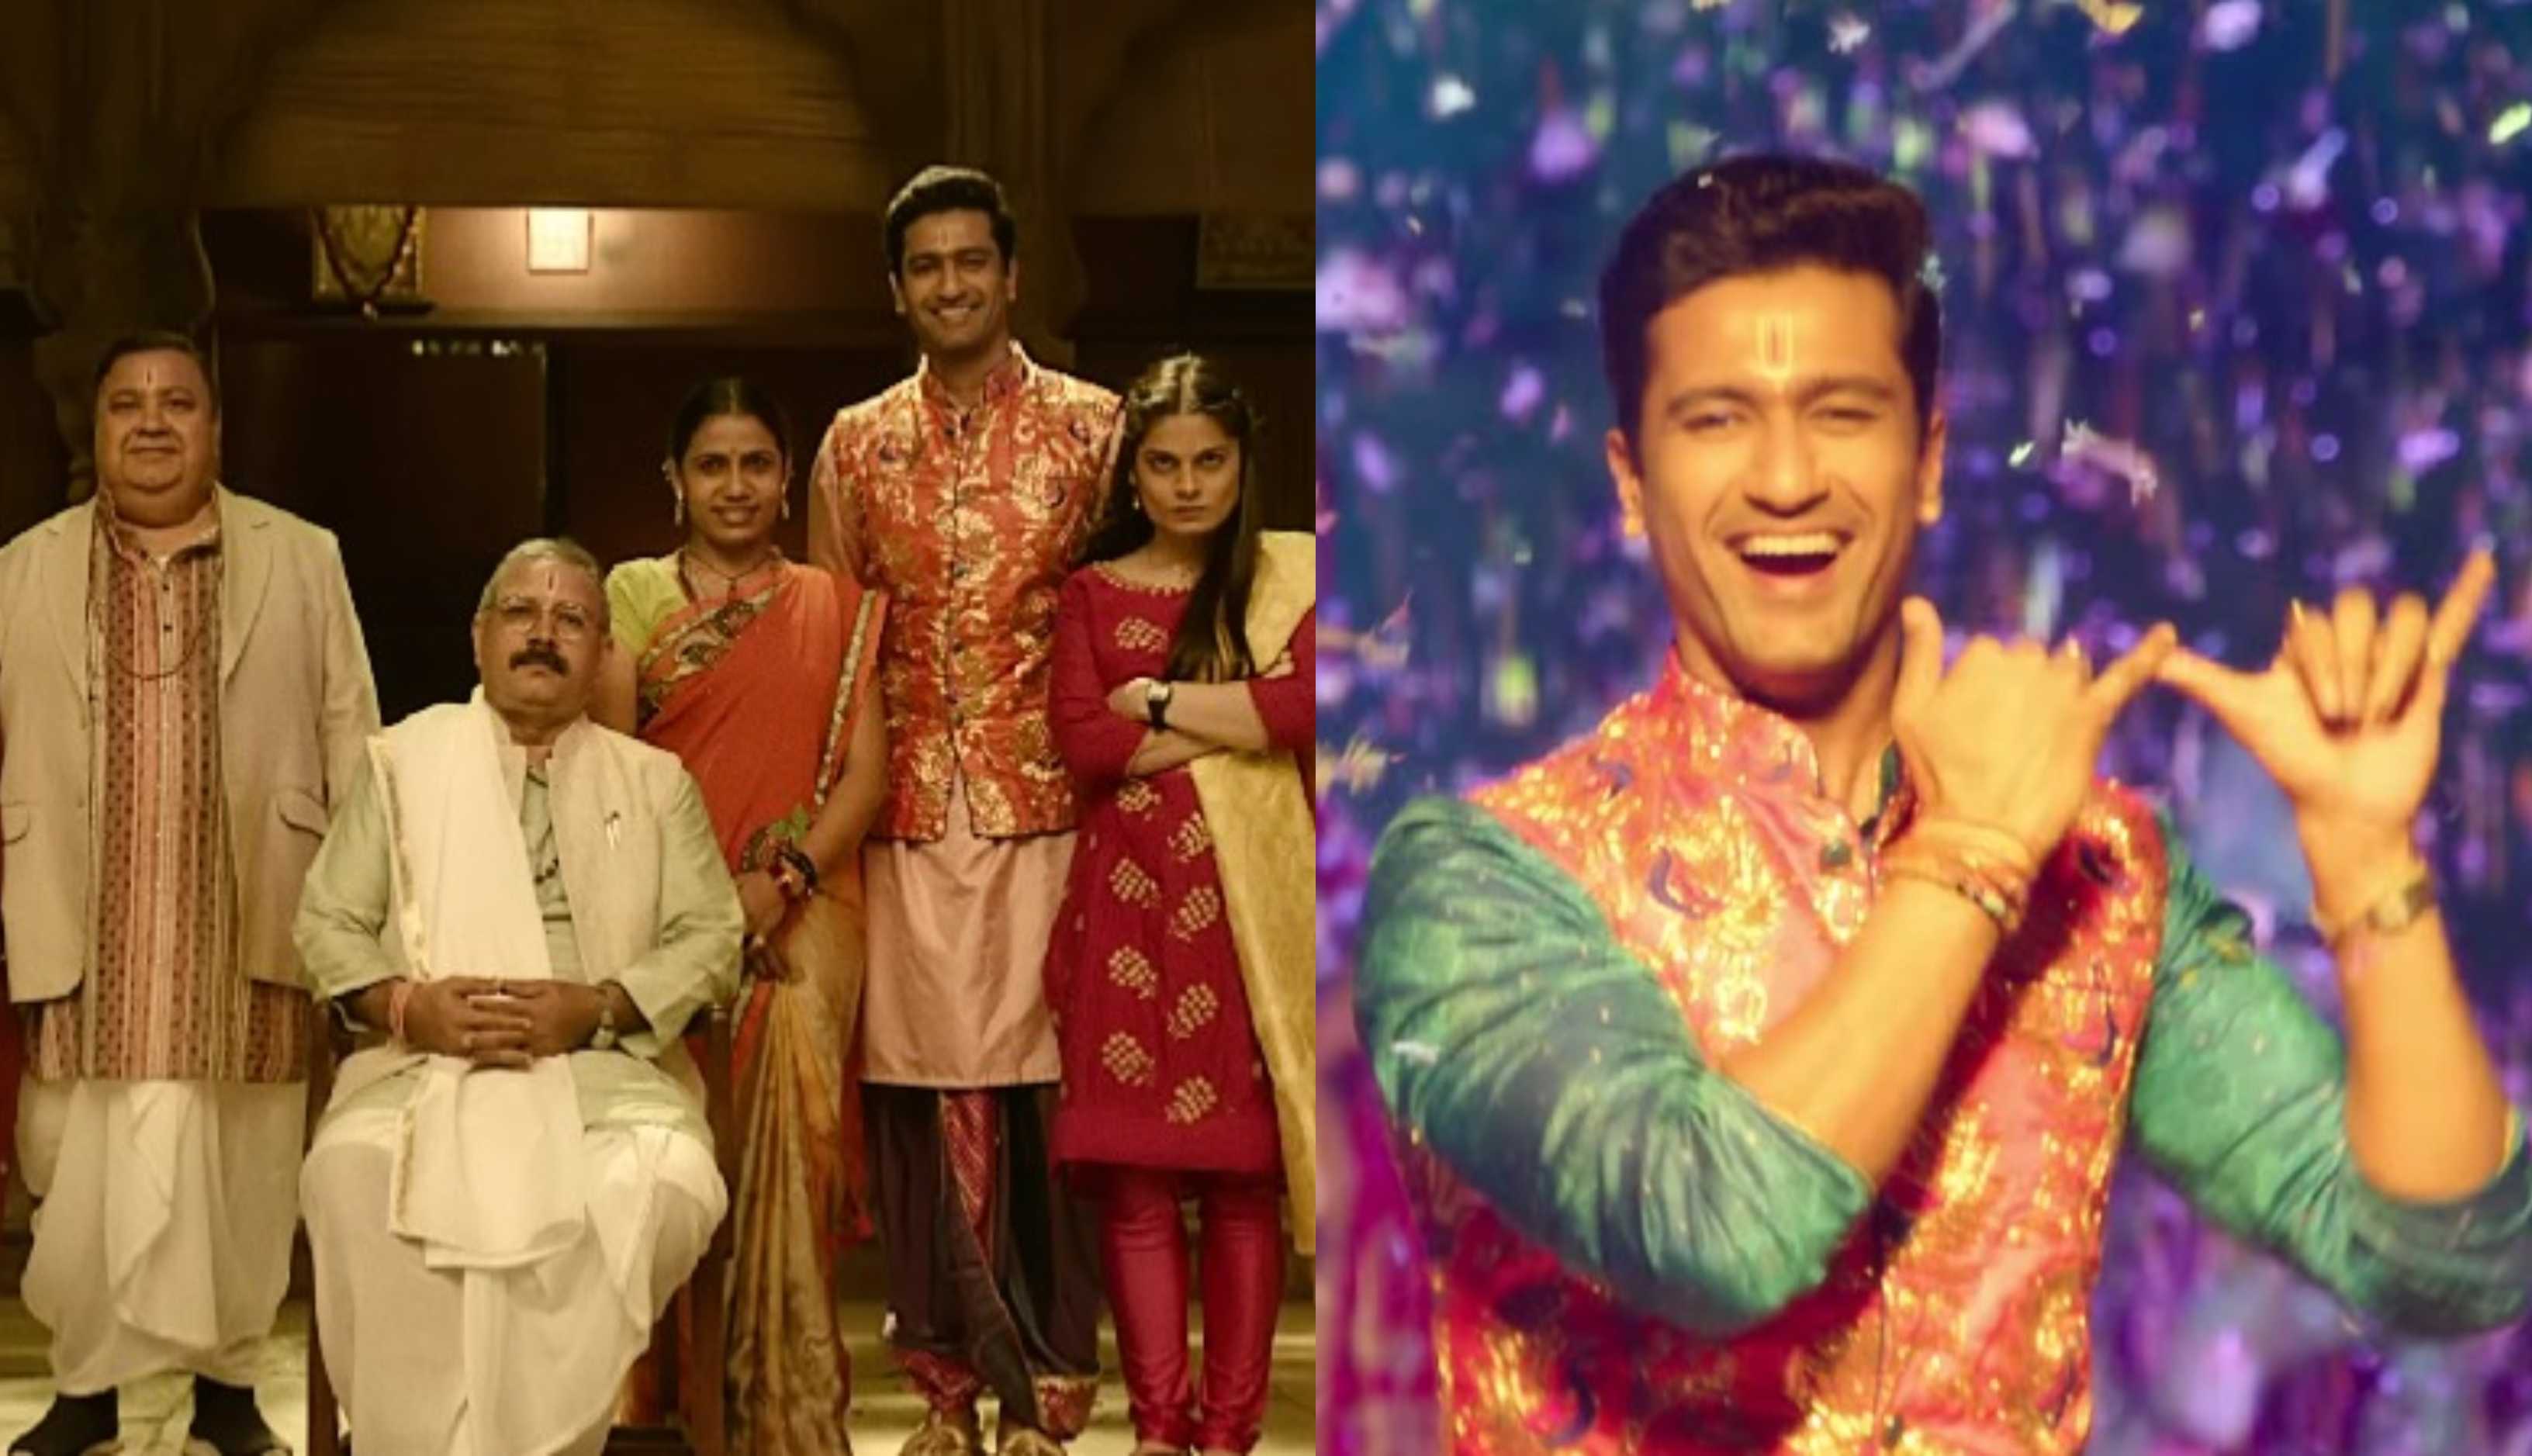 The Great Indian Family Review: Bhajan Kumar aka Vicky Kaushal and Kumud Mishra shine bright in this unique film